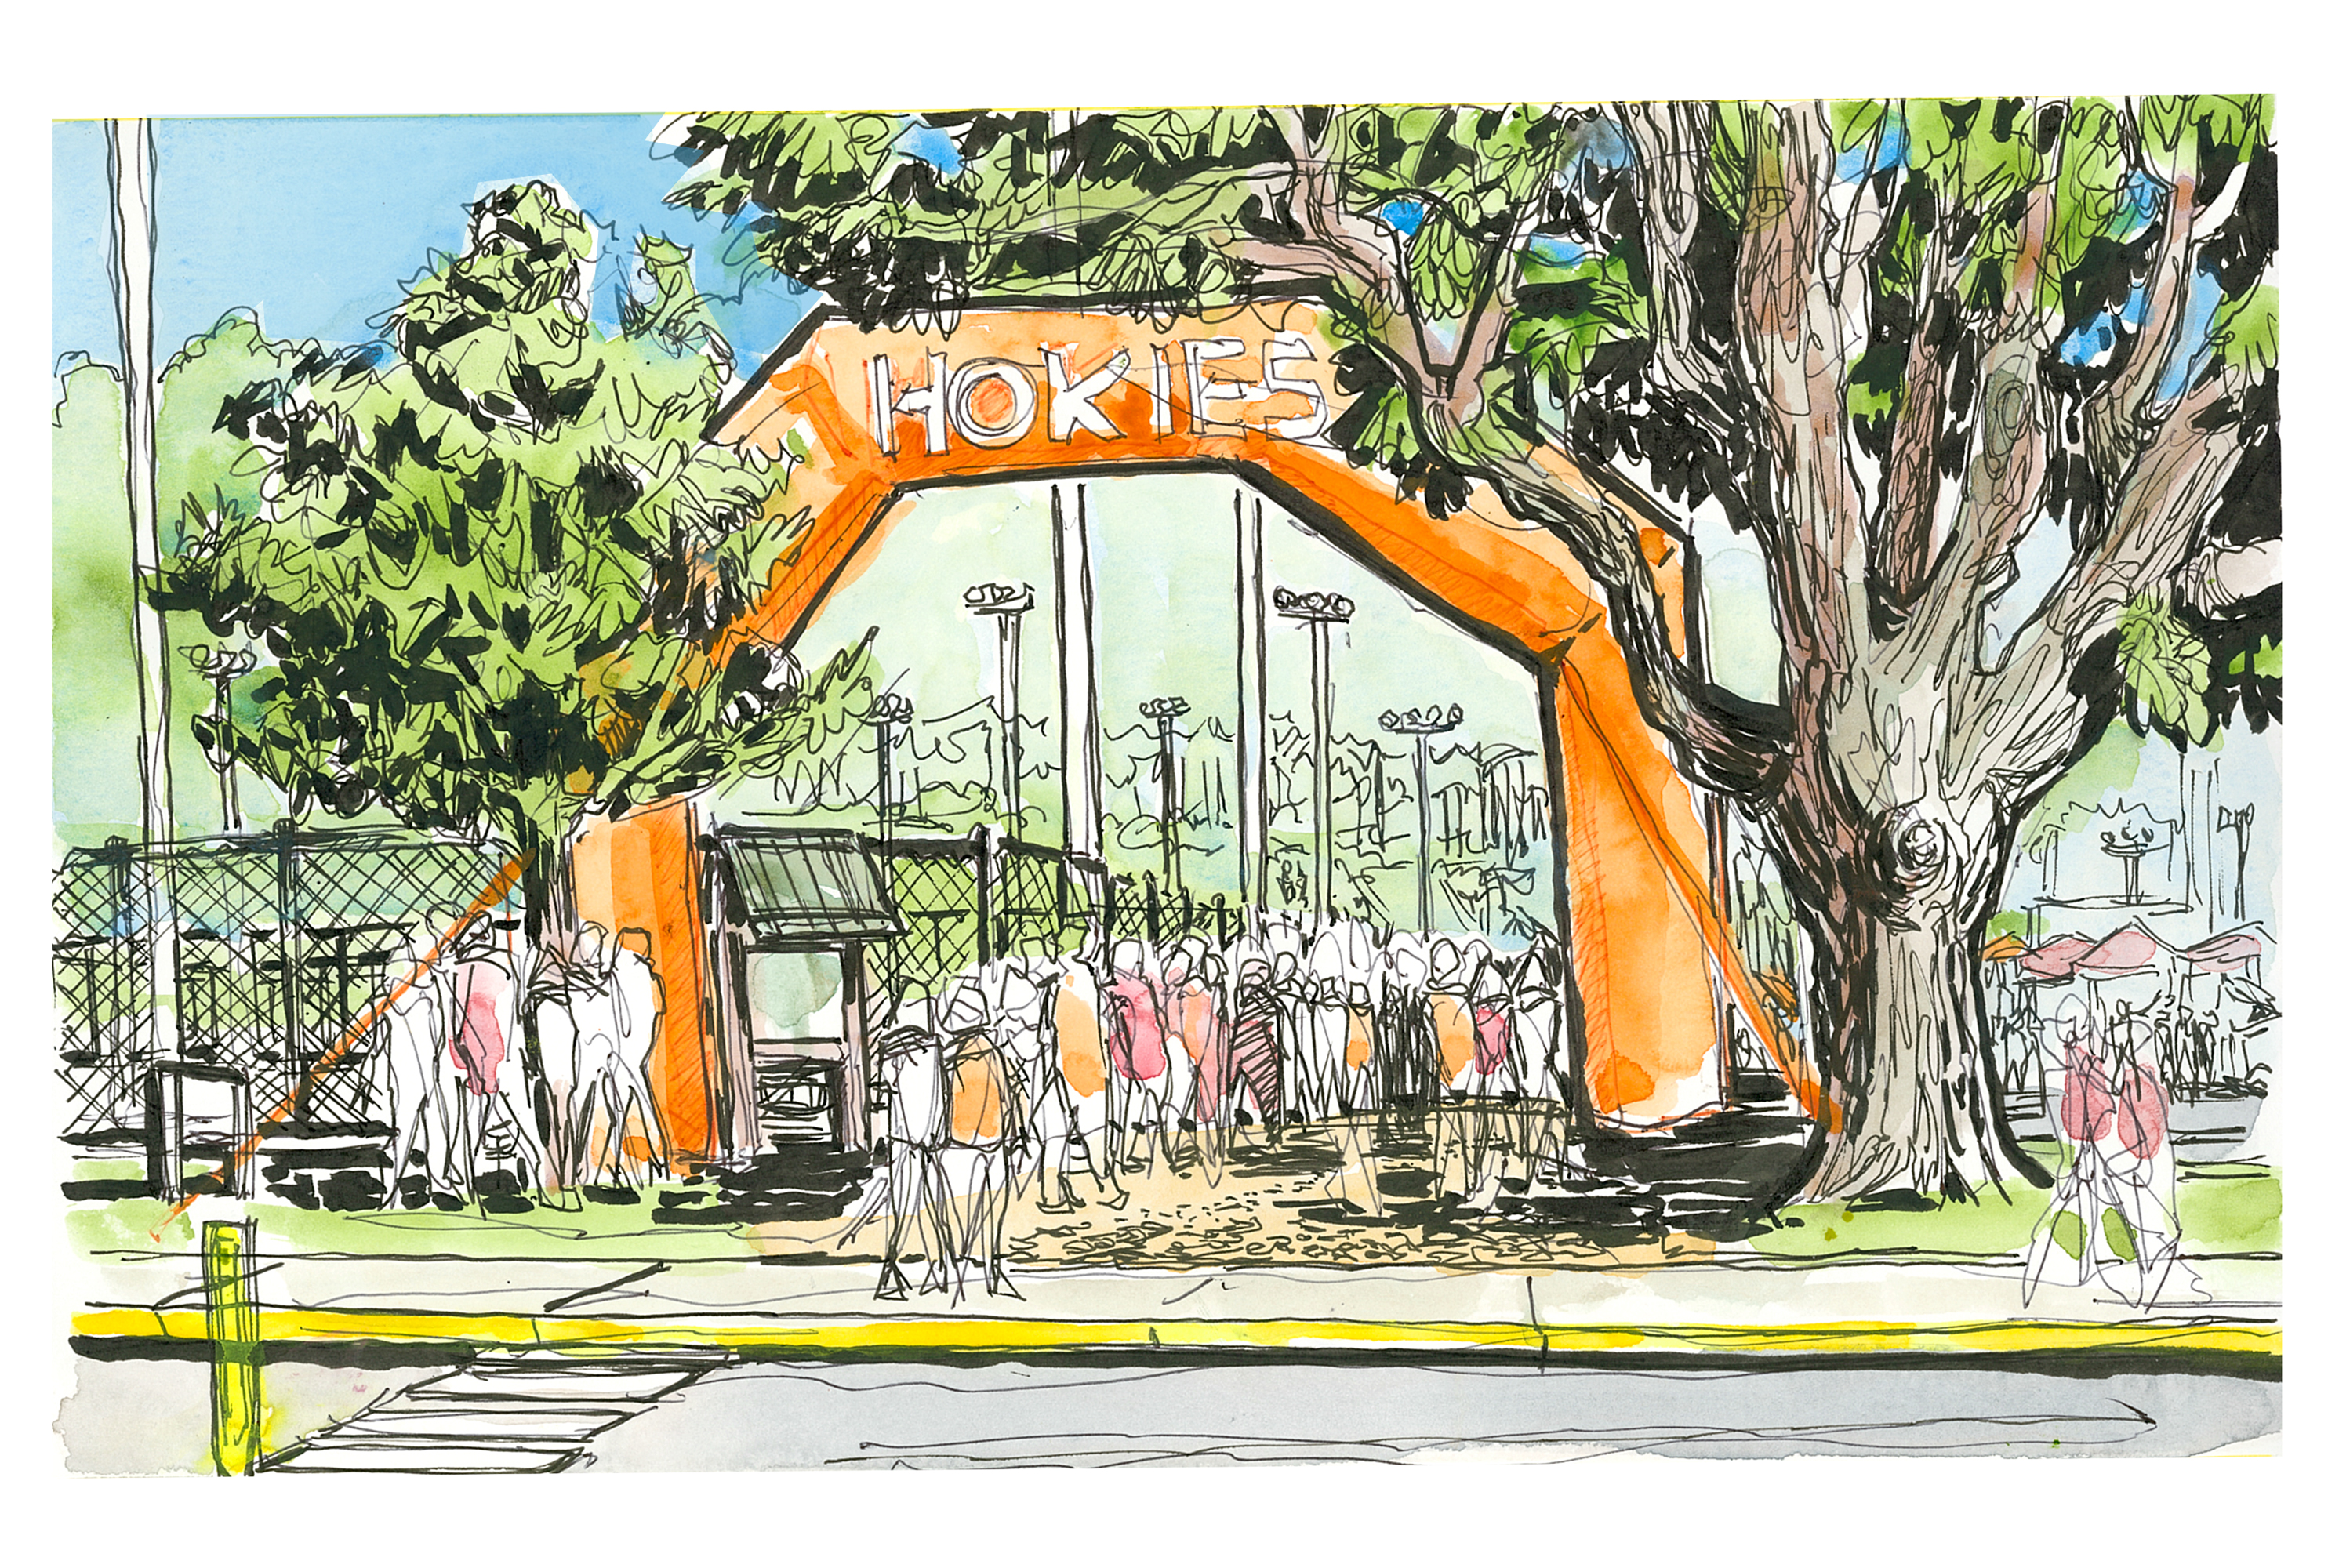 ink and watercolor of the washington street inflateable Hokies arch for Gate 7 student entry